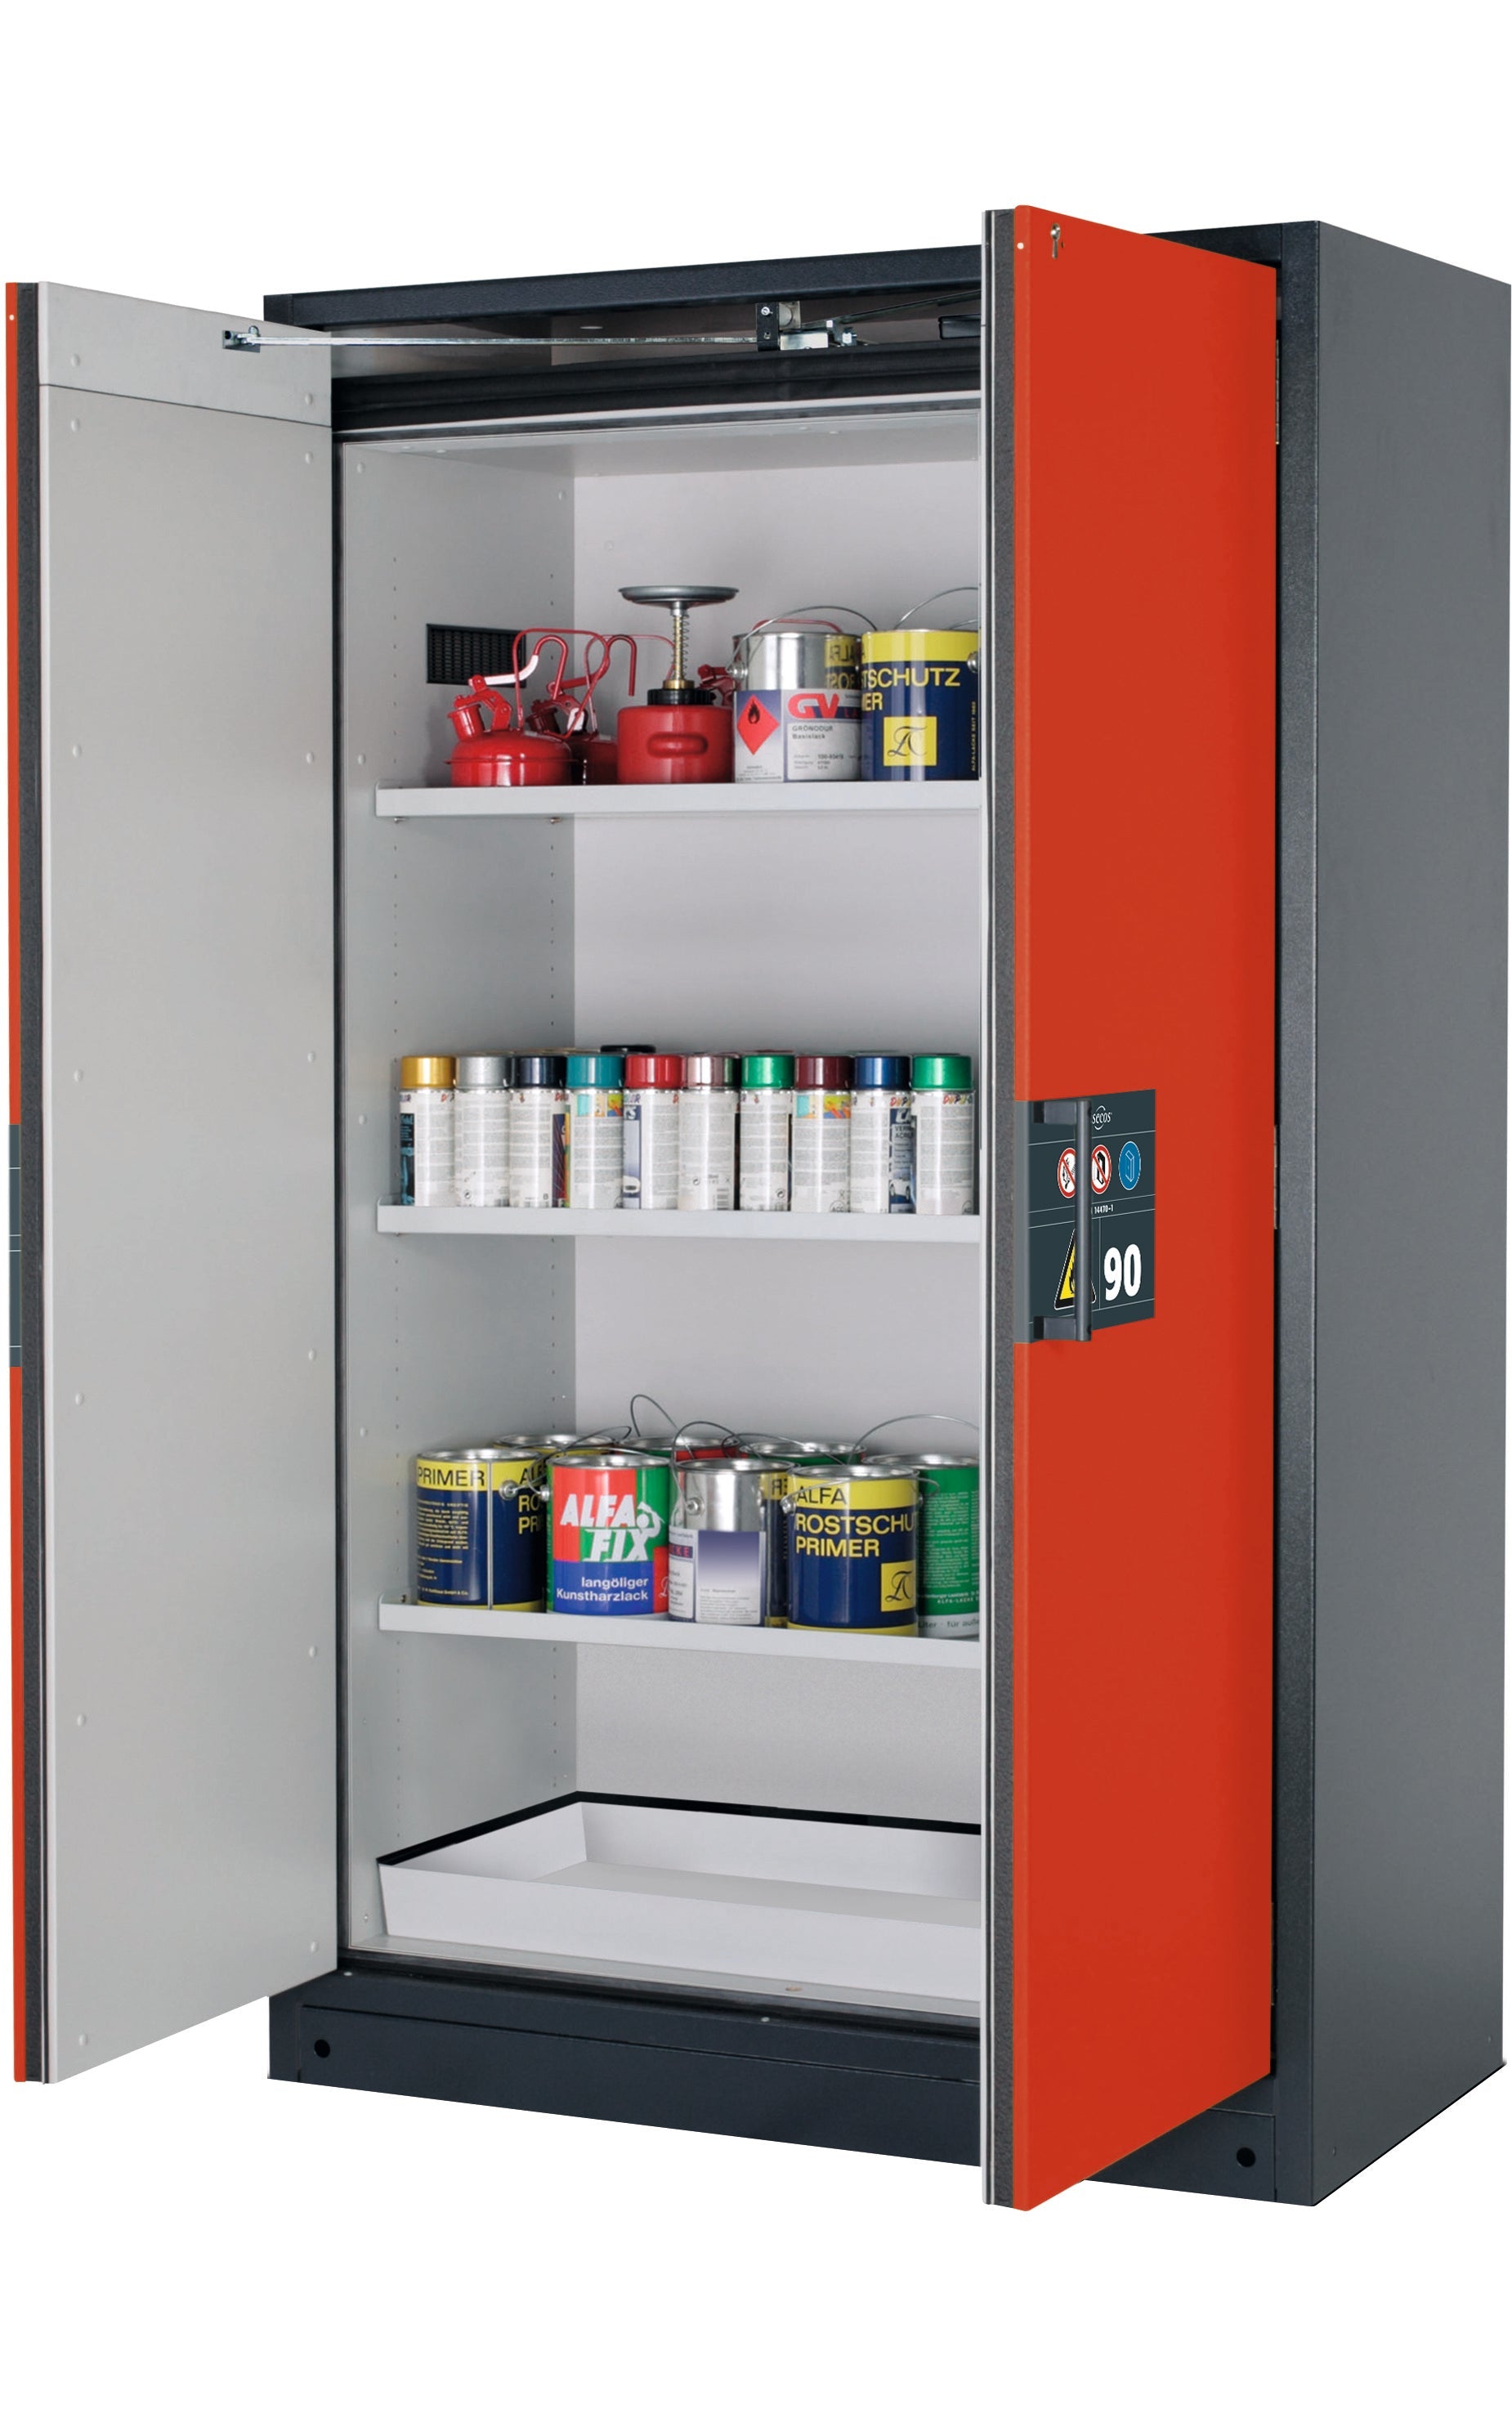 Type 90 safety storage cabinet Q-PEGASUS-90 model Q90.195.120.WDAC in traffic red RAL 3020 with 3x shelf standard (sheet steel),